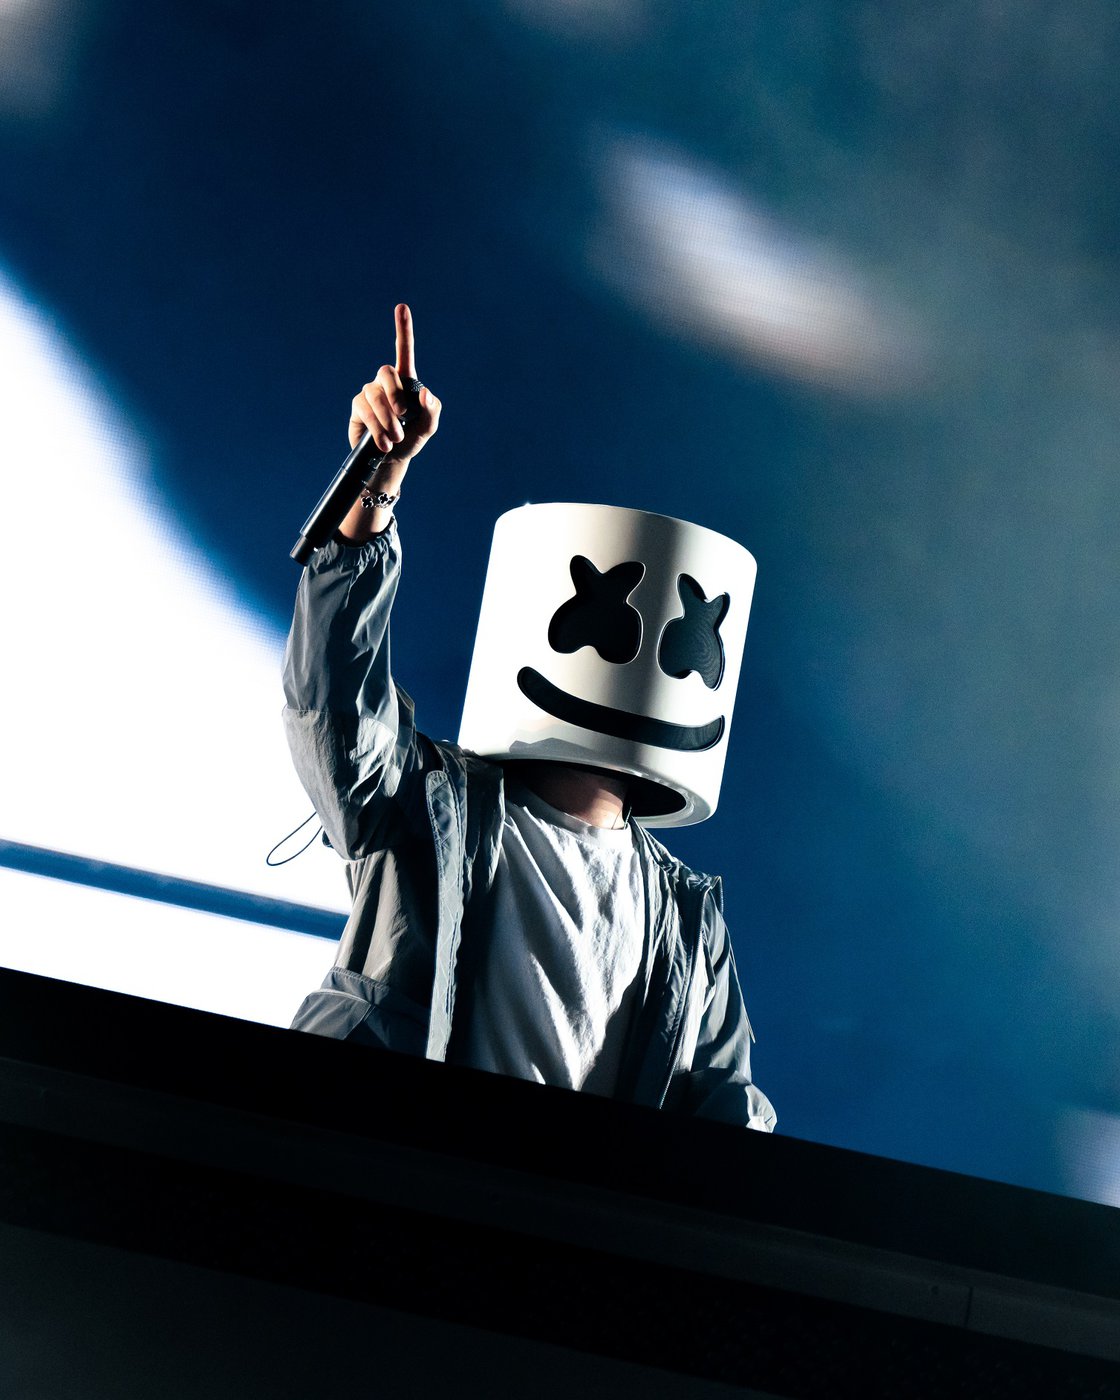 Marshmello had the crowd dancing as he closed out the festival